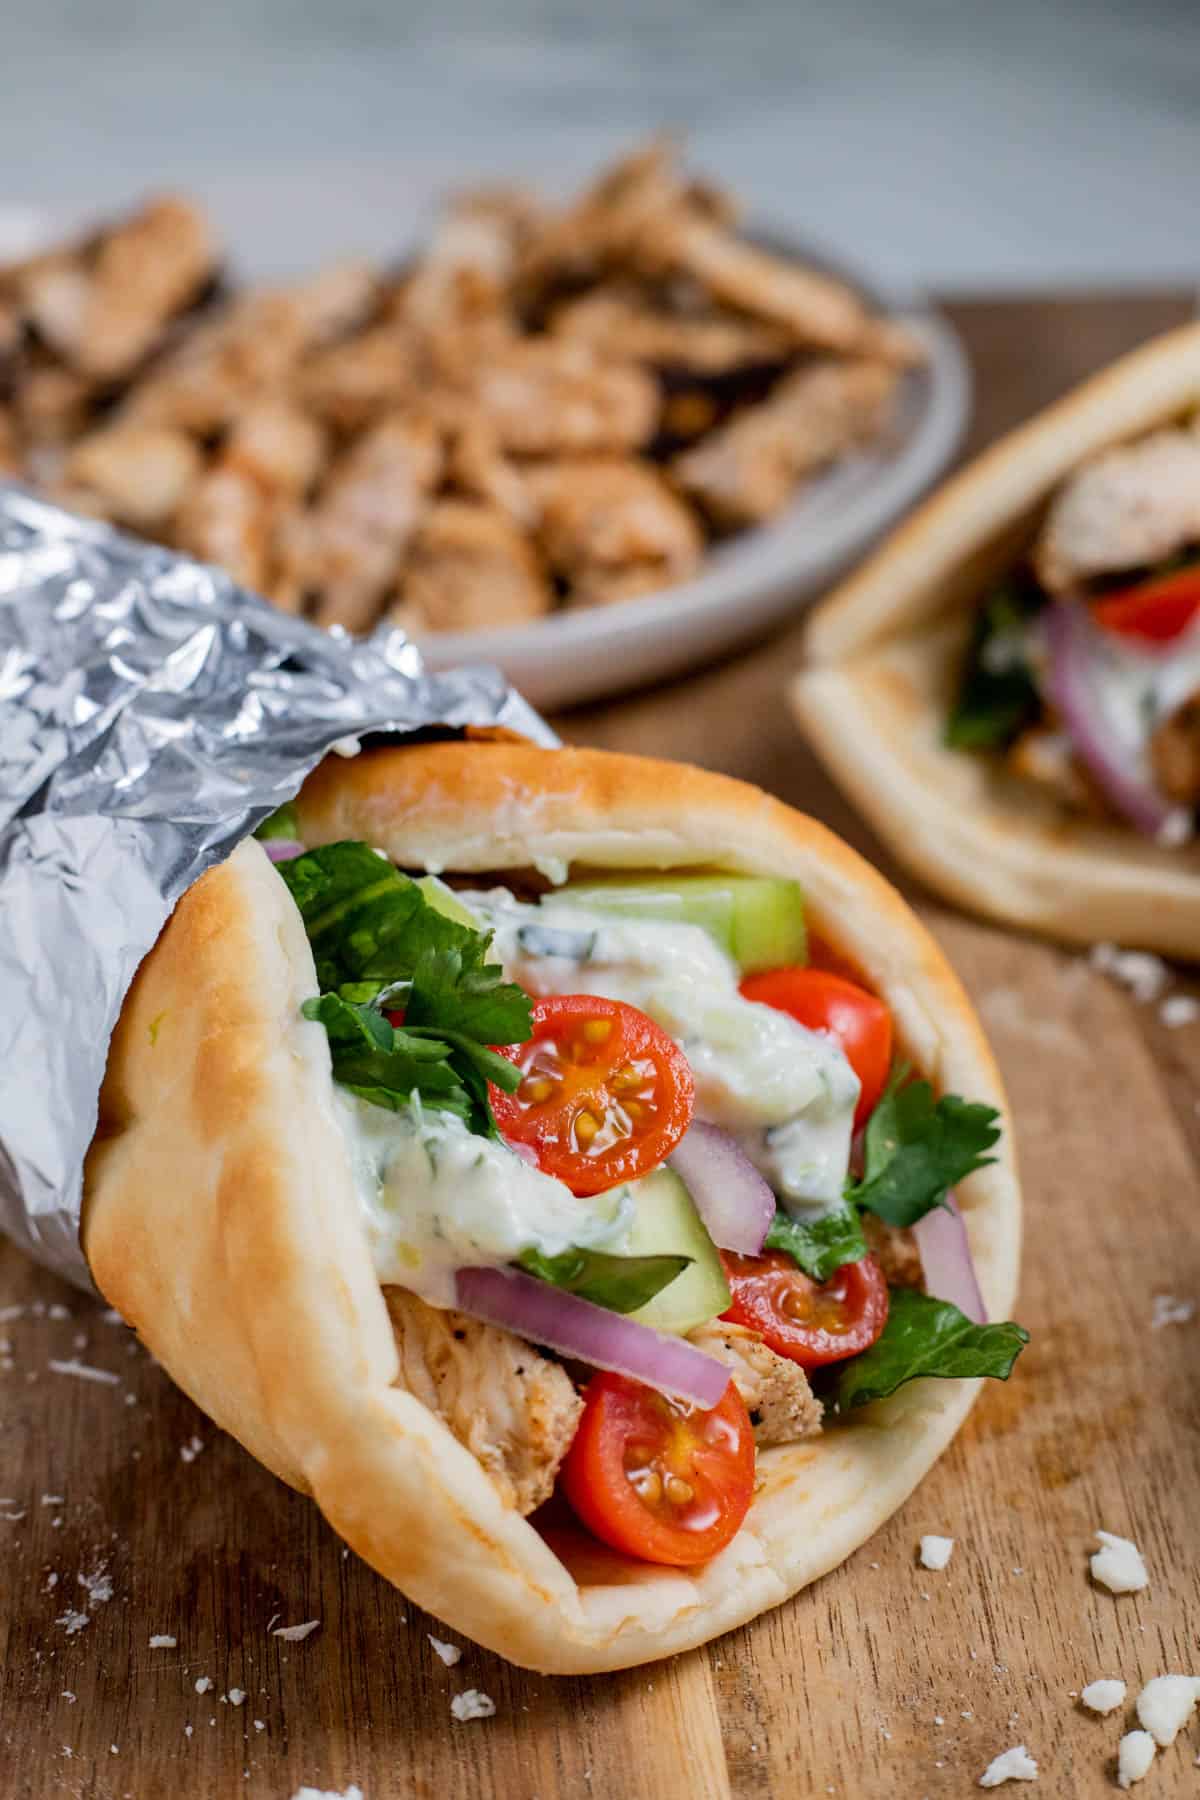 A Greek gyro wrapped in foil and placed on a wood surface.